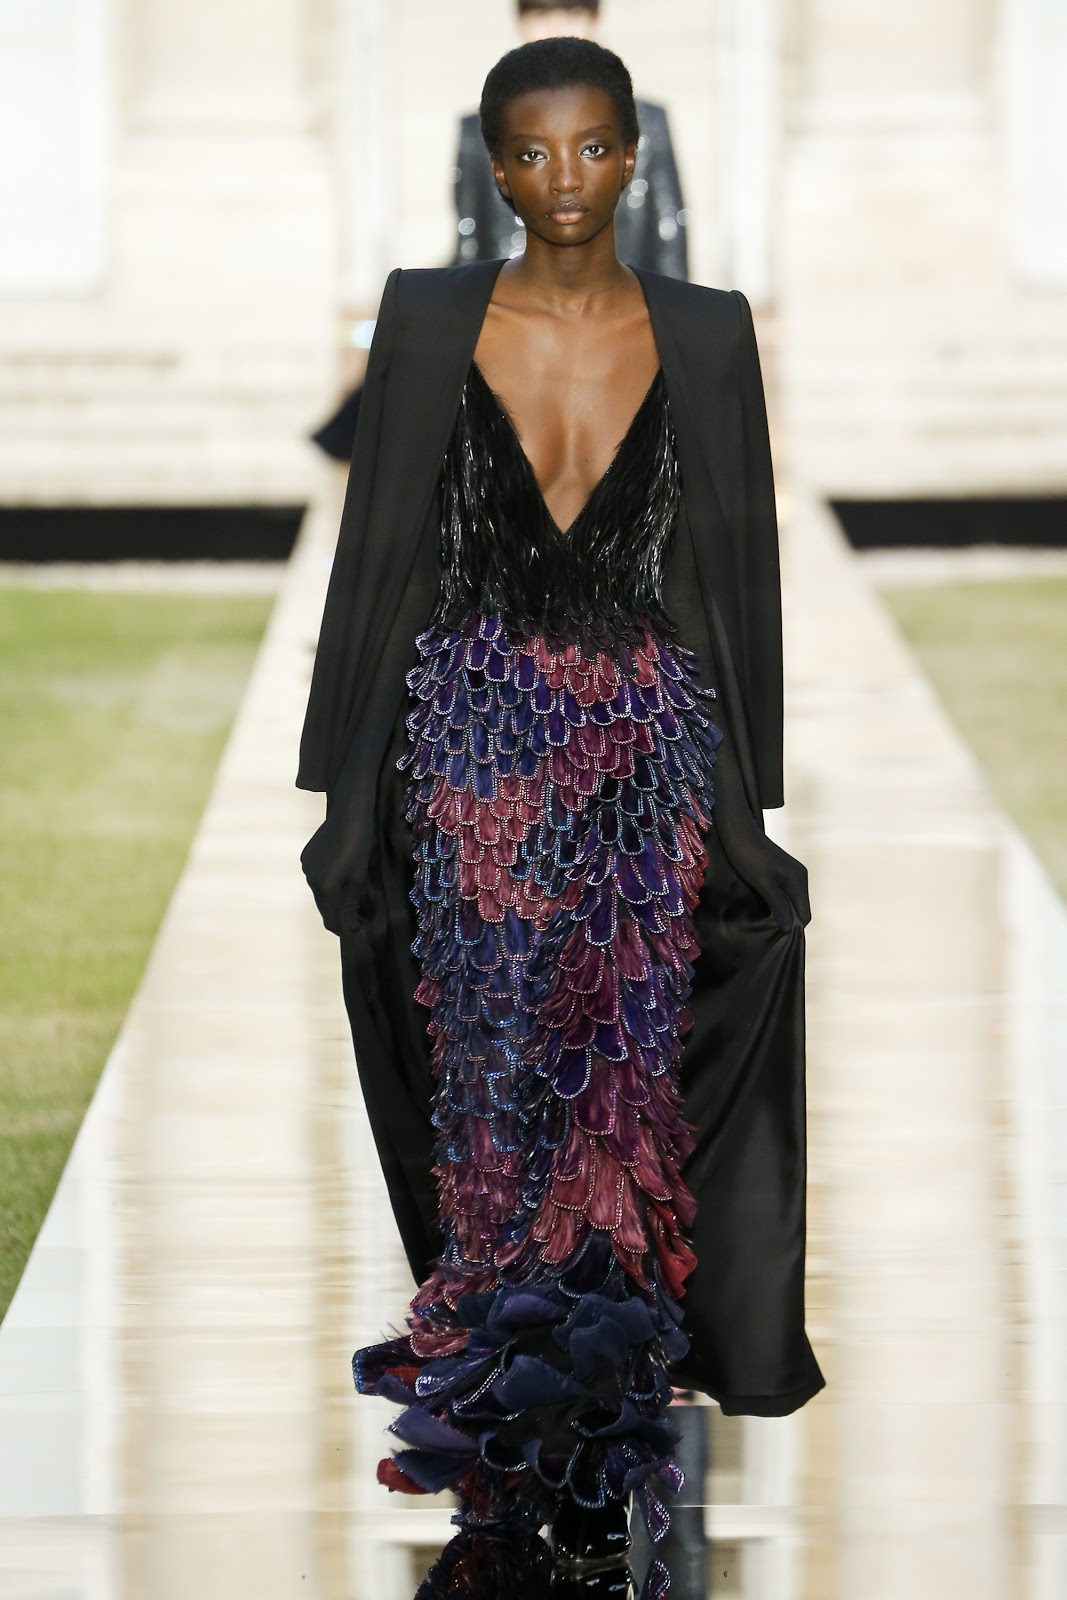 Givenchy Parigi Haute Couture Fall Winter 2018-19 | Cool Chic Style Fashion